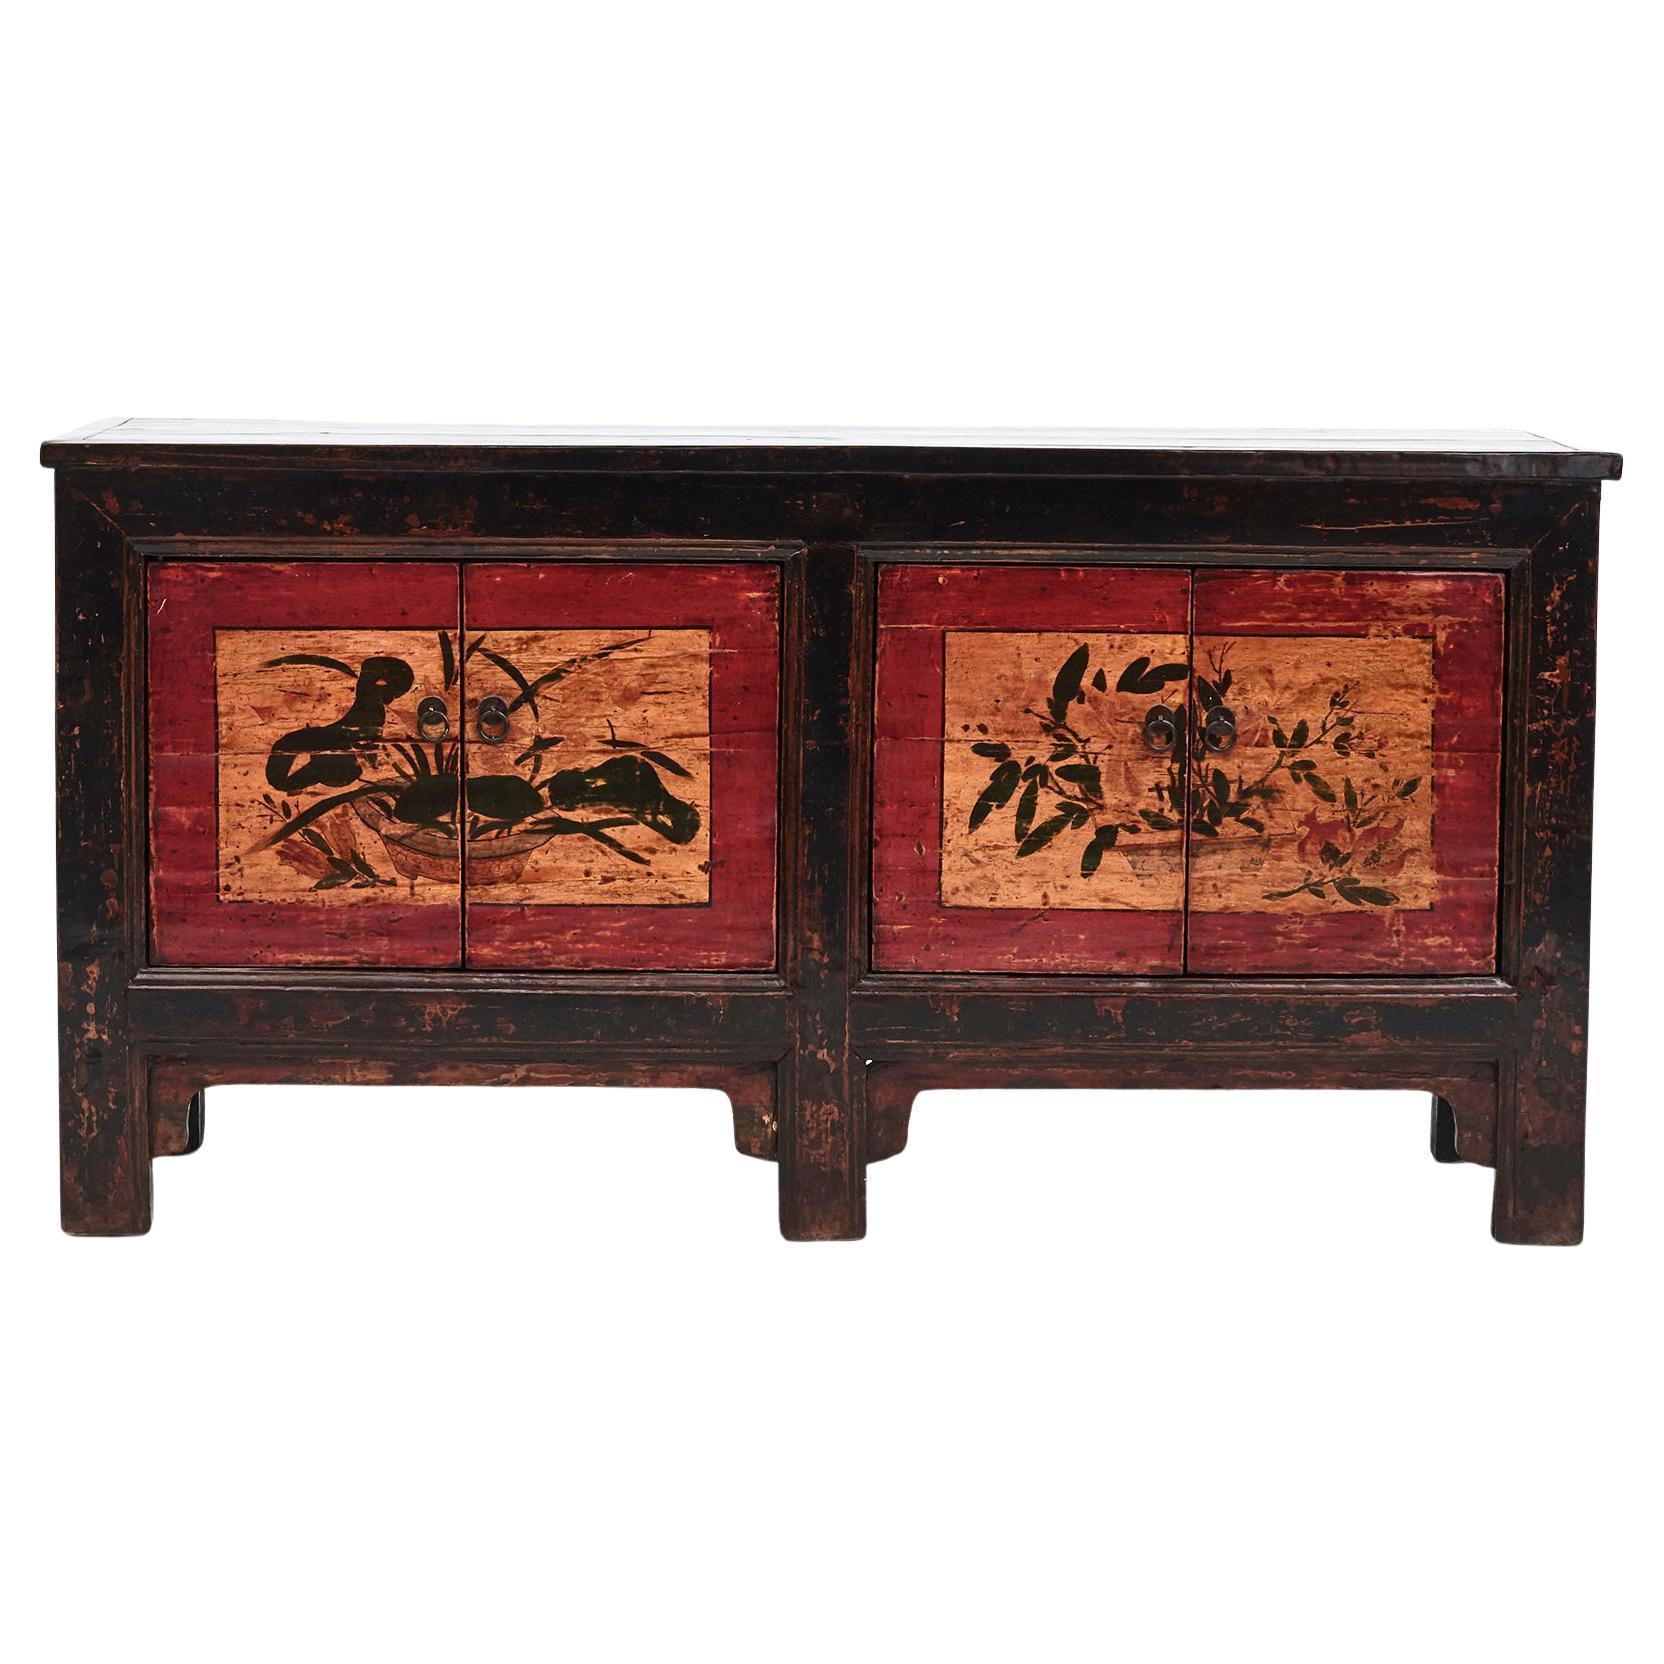 Decorative Lacquered Sideboard From Shandong Province